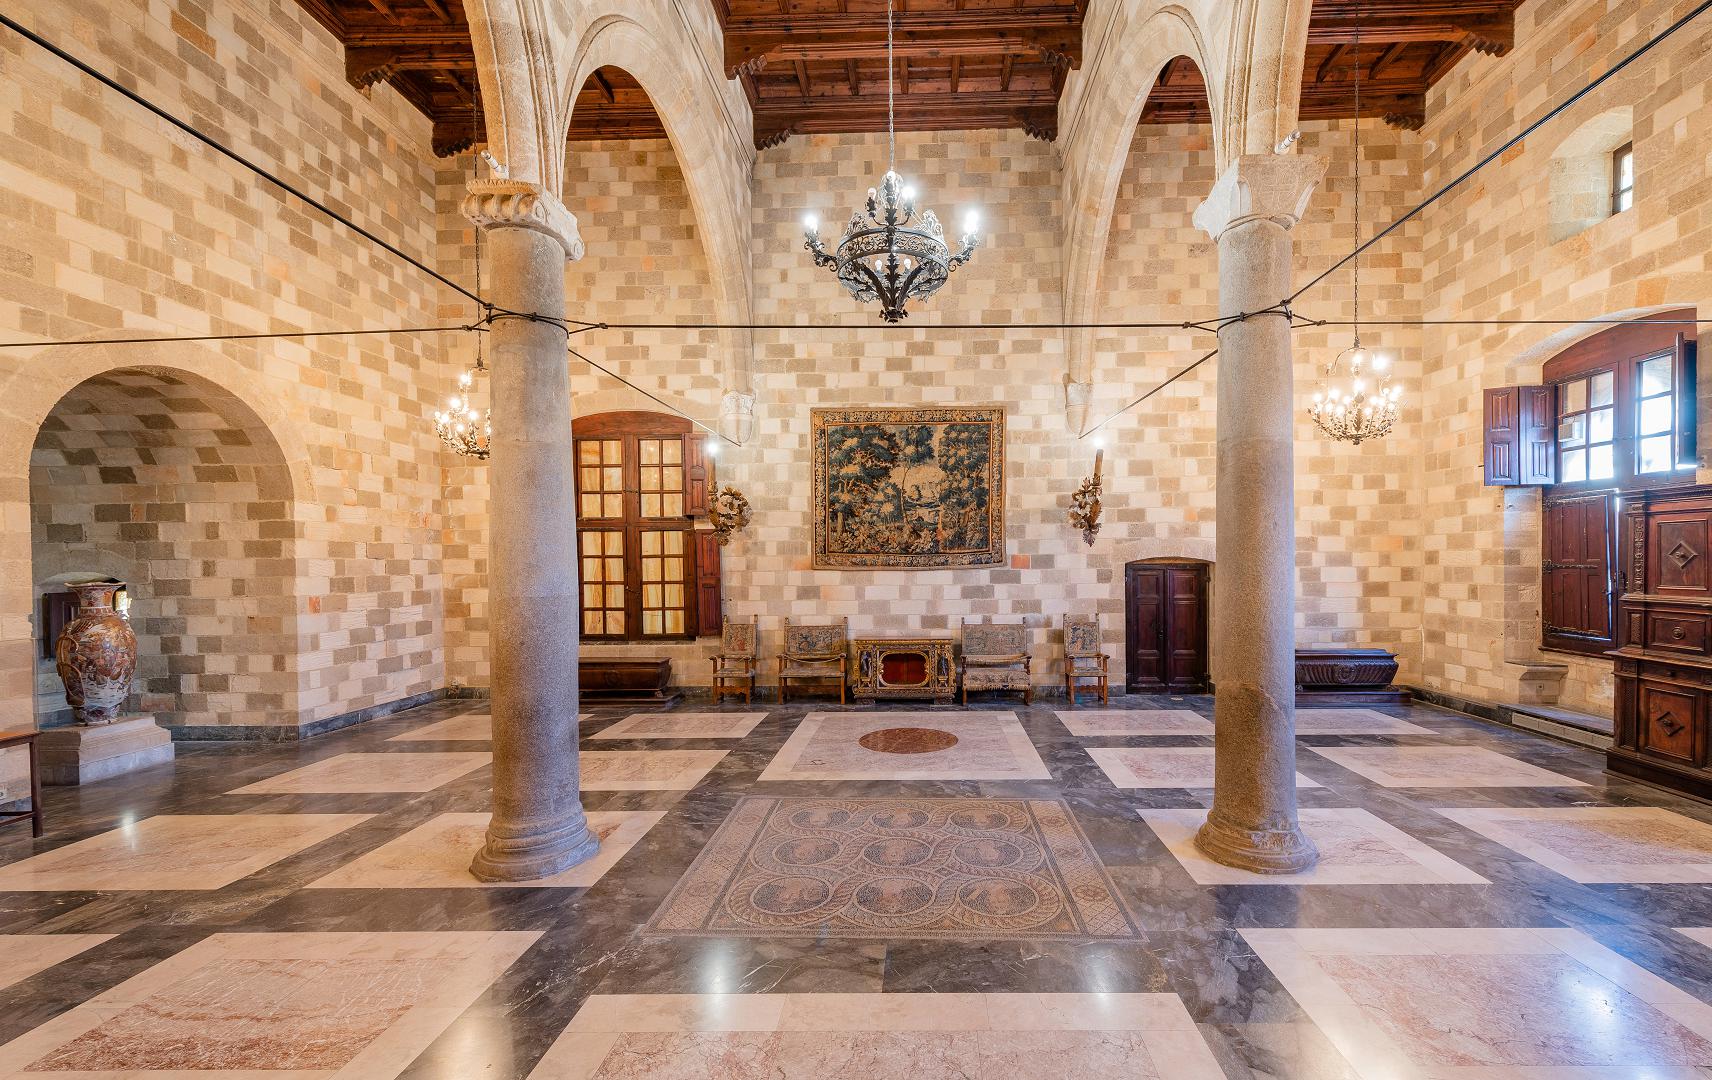 Grand Master Palace in Rhodes, Greece